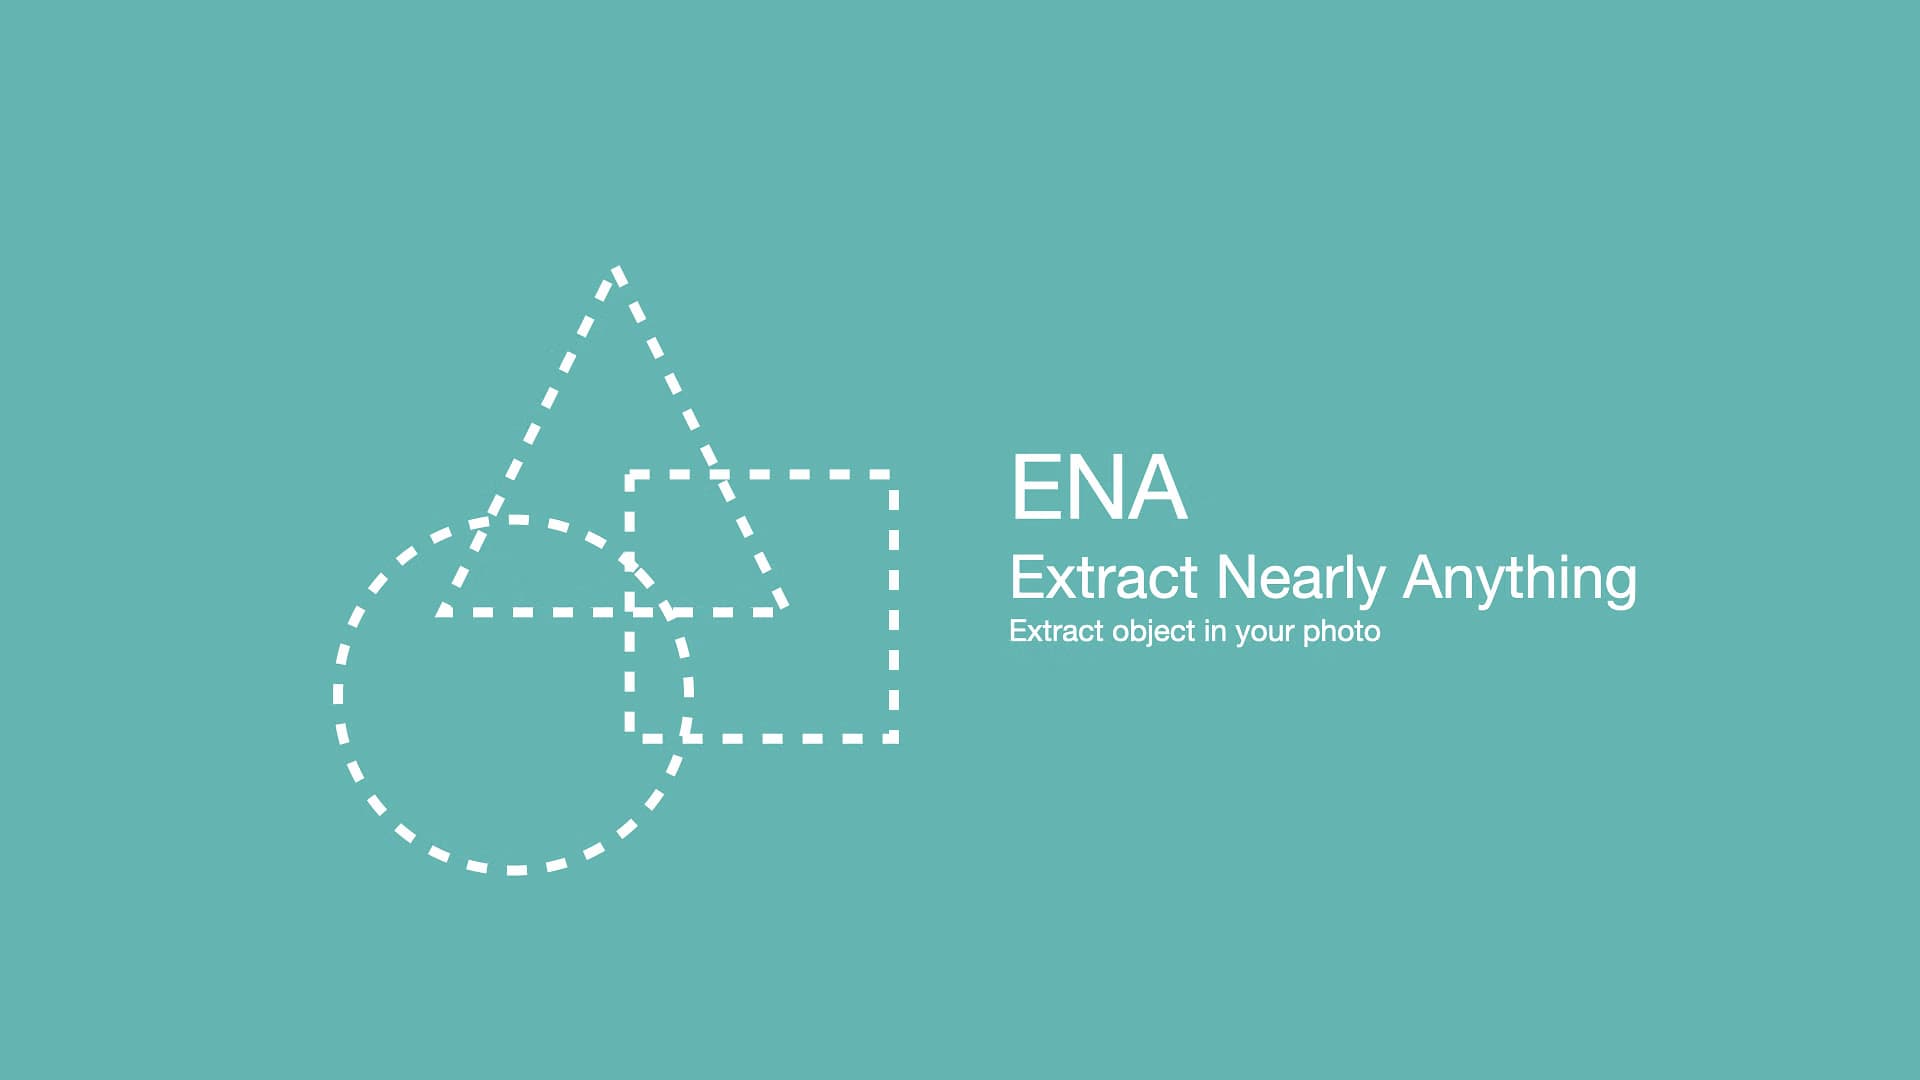 ENA — Extract Nearly Anything is a jailbreak tweak that lets you isolate additional objects besides the subject from photos